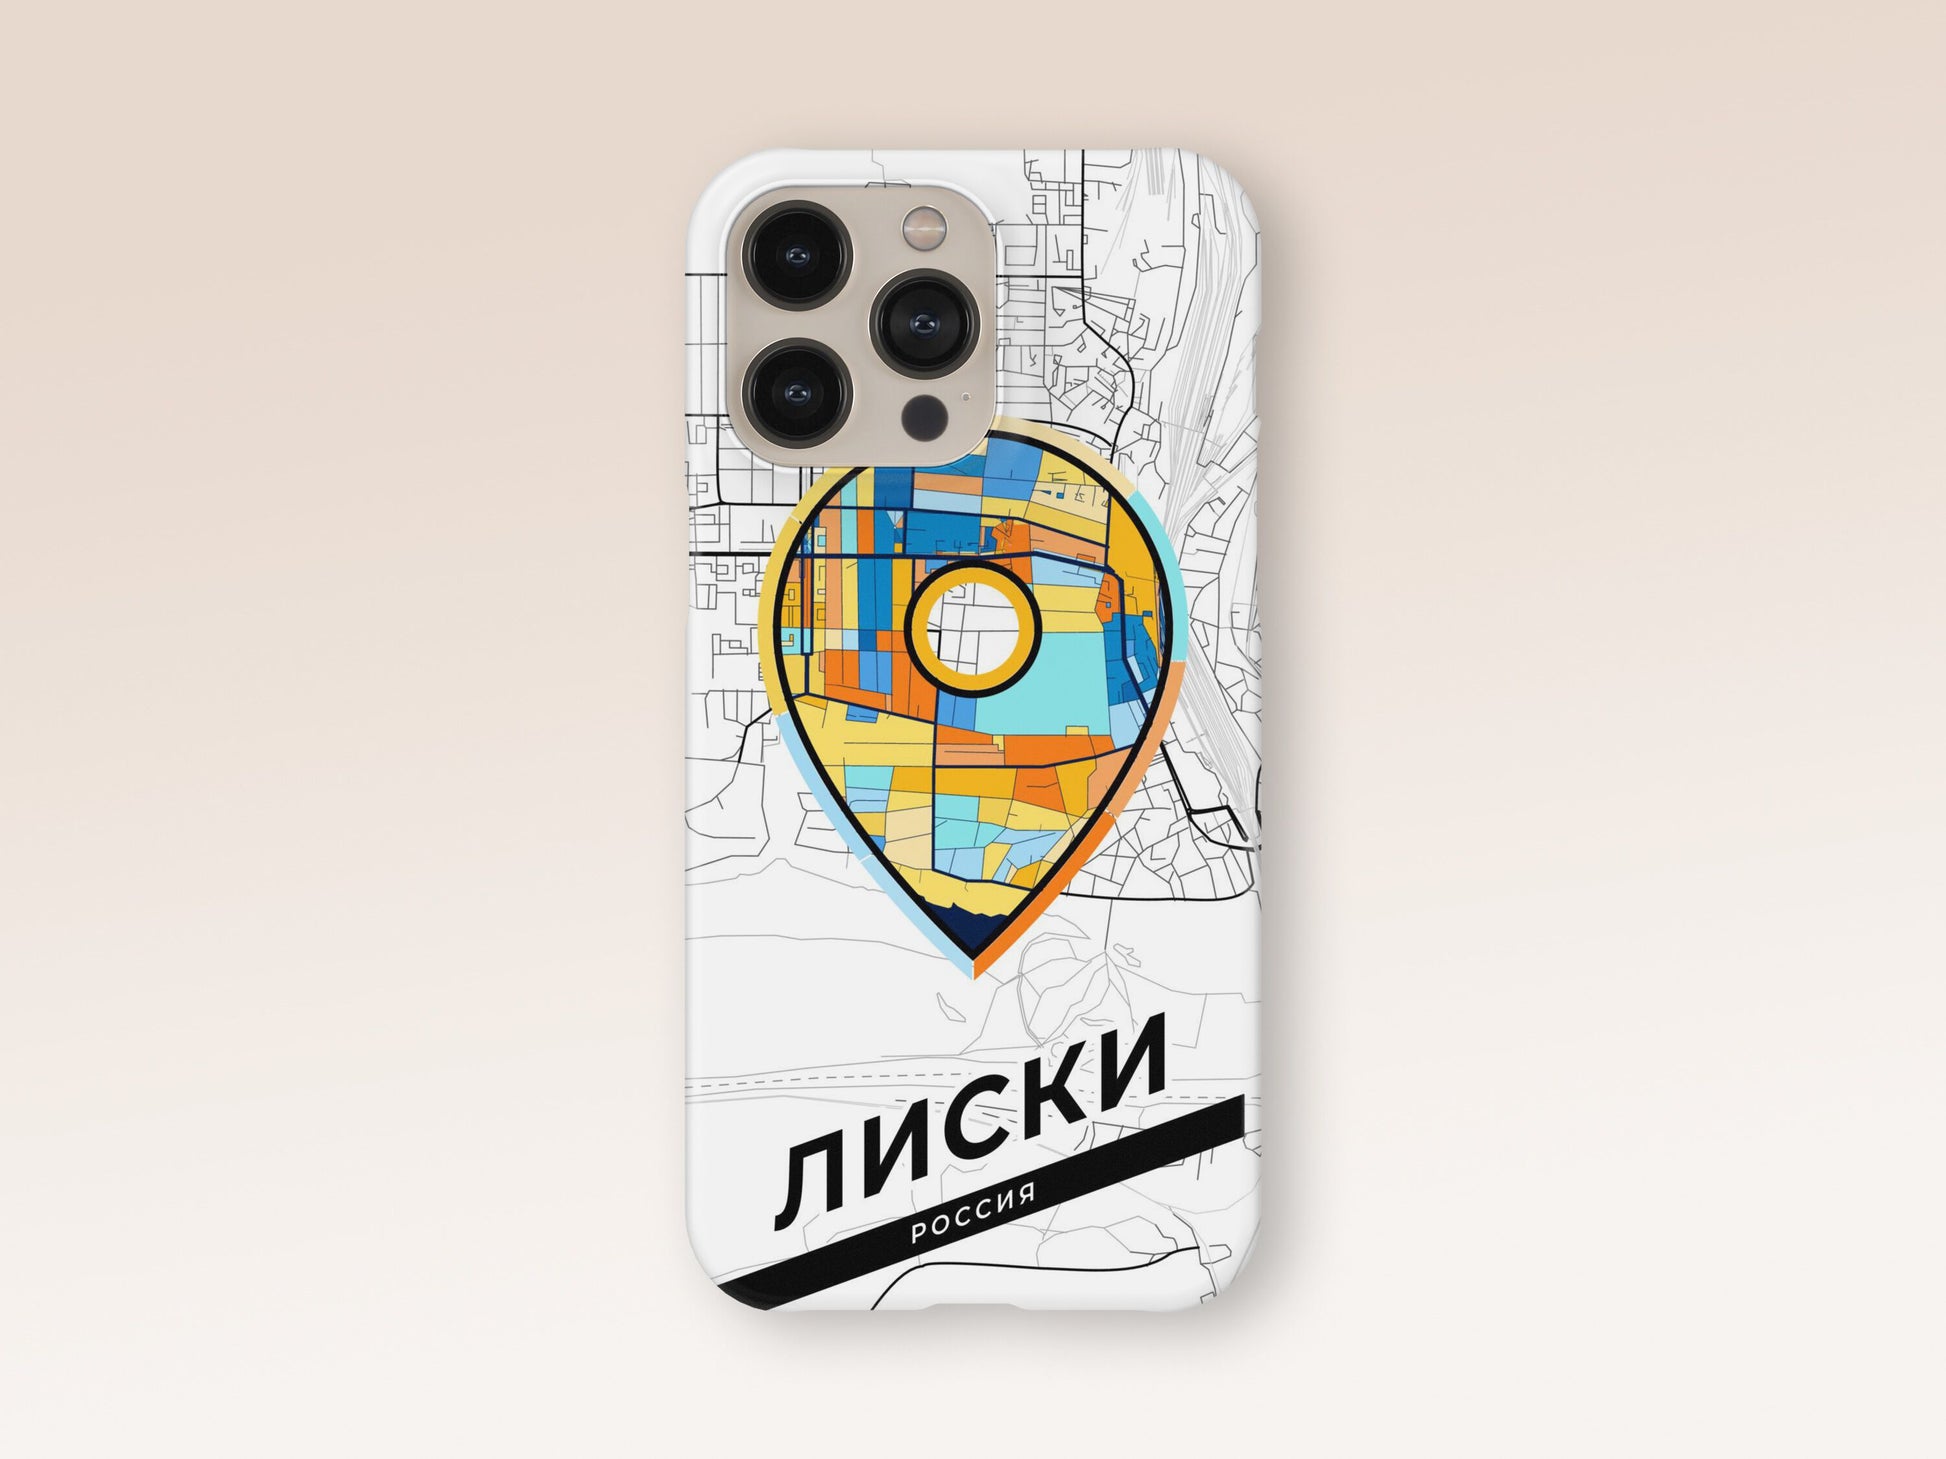 Liski Russia slim phone case with colorful icon. Birthday, wedding or housewarming gift. Couple match cases. 1